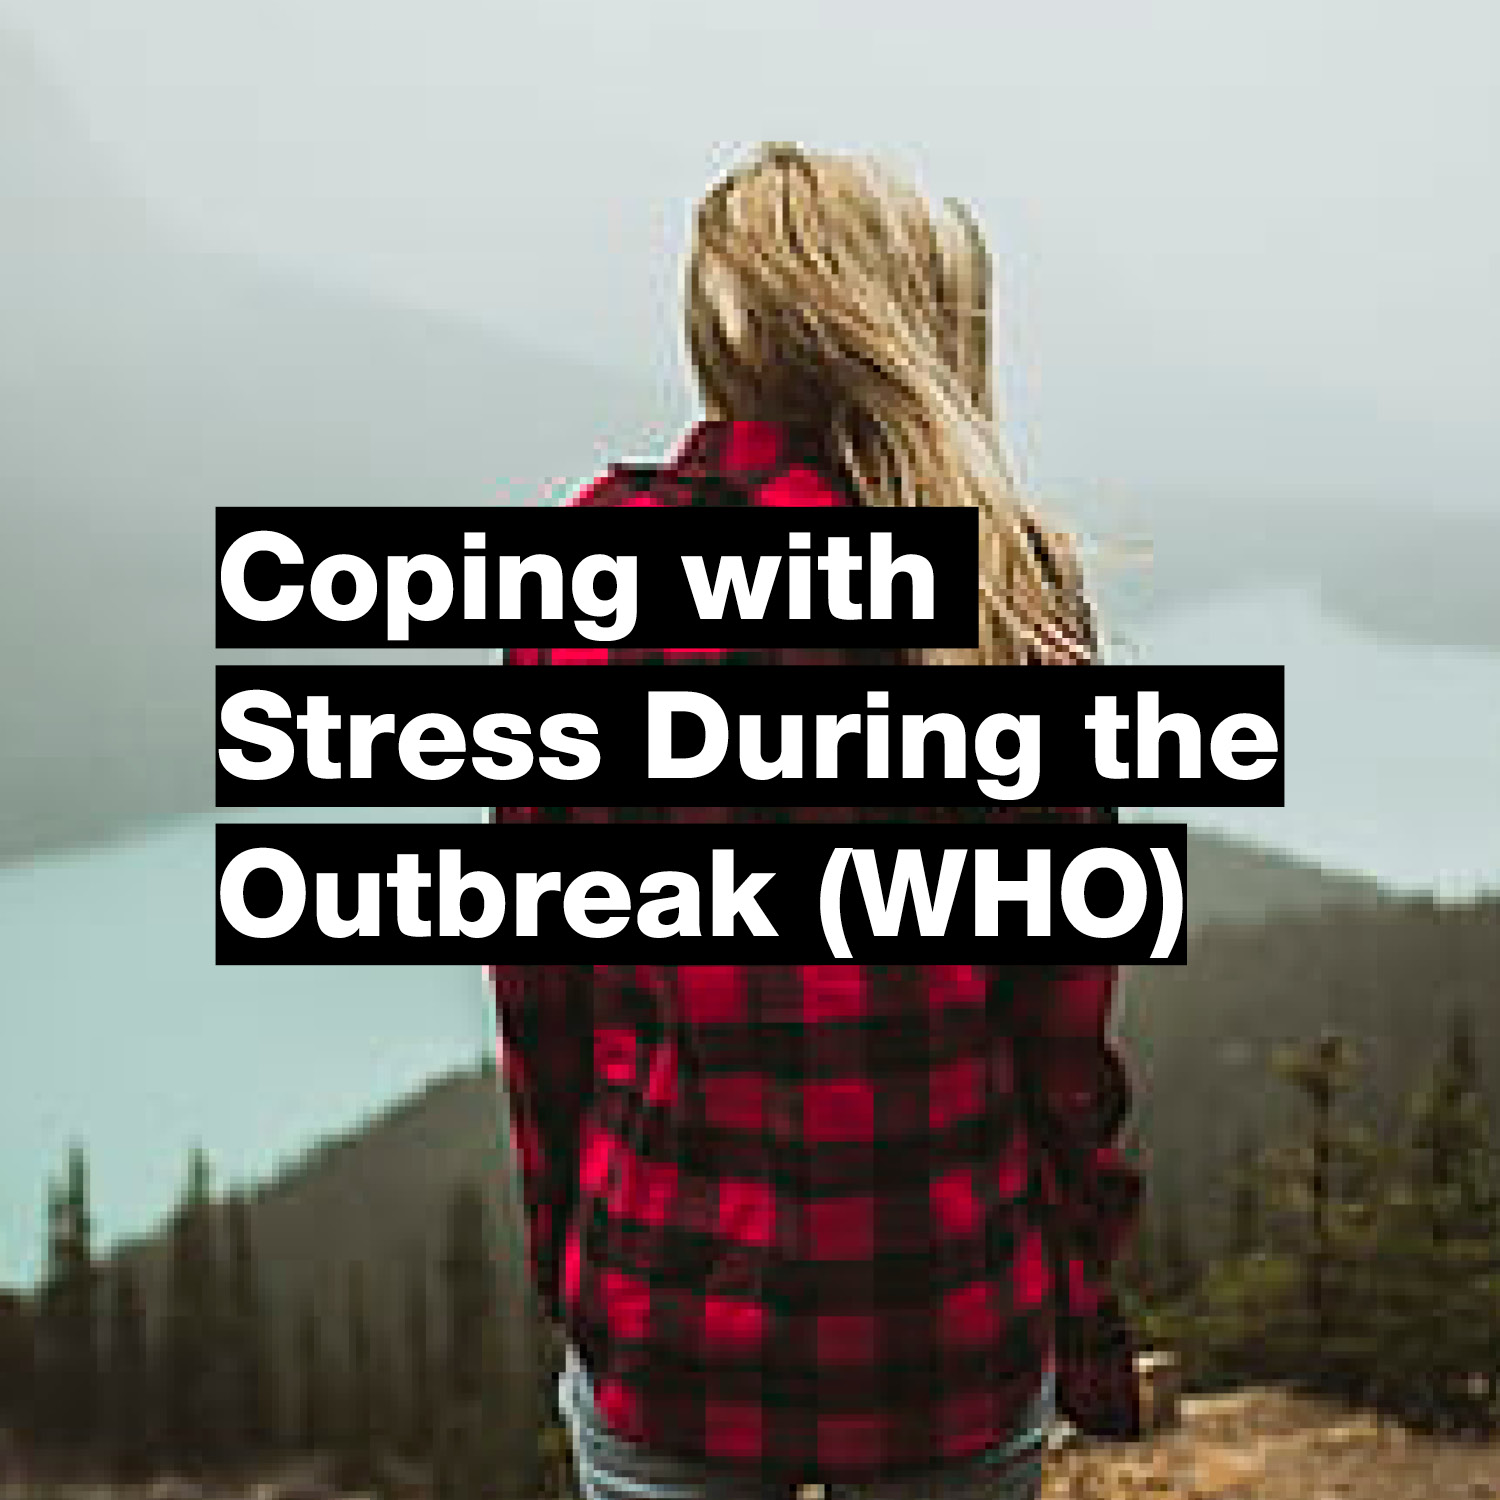 Coping with Stress During the Outbreak (WHO)